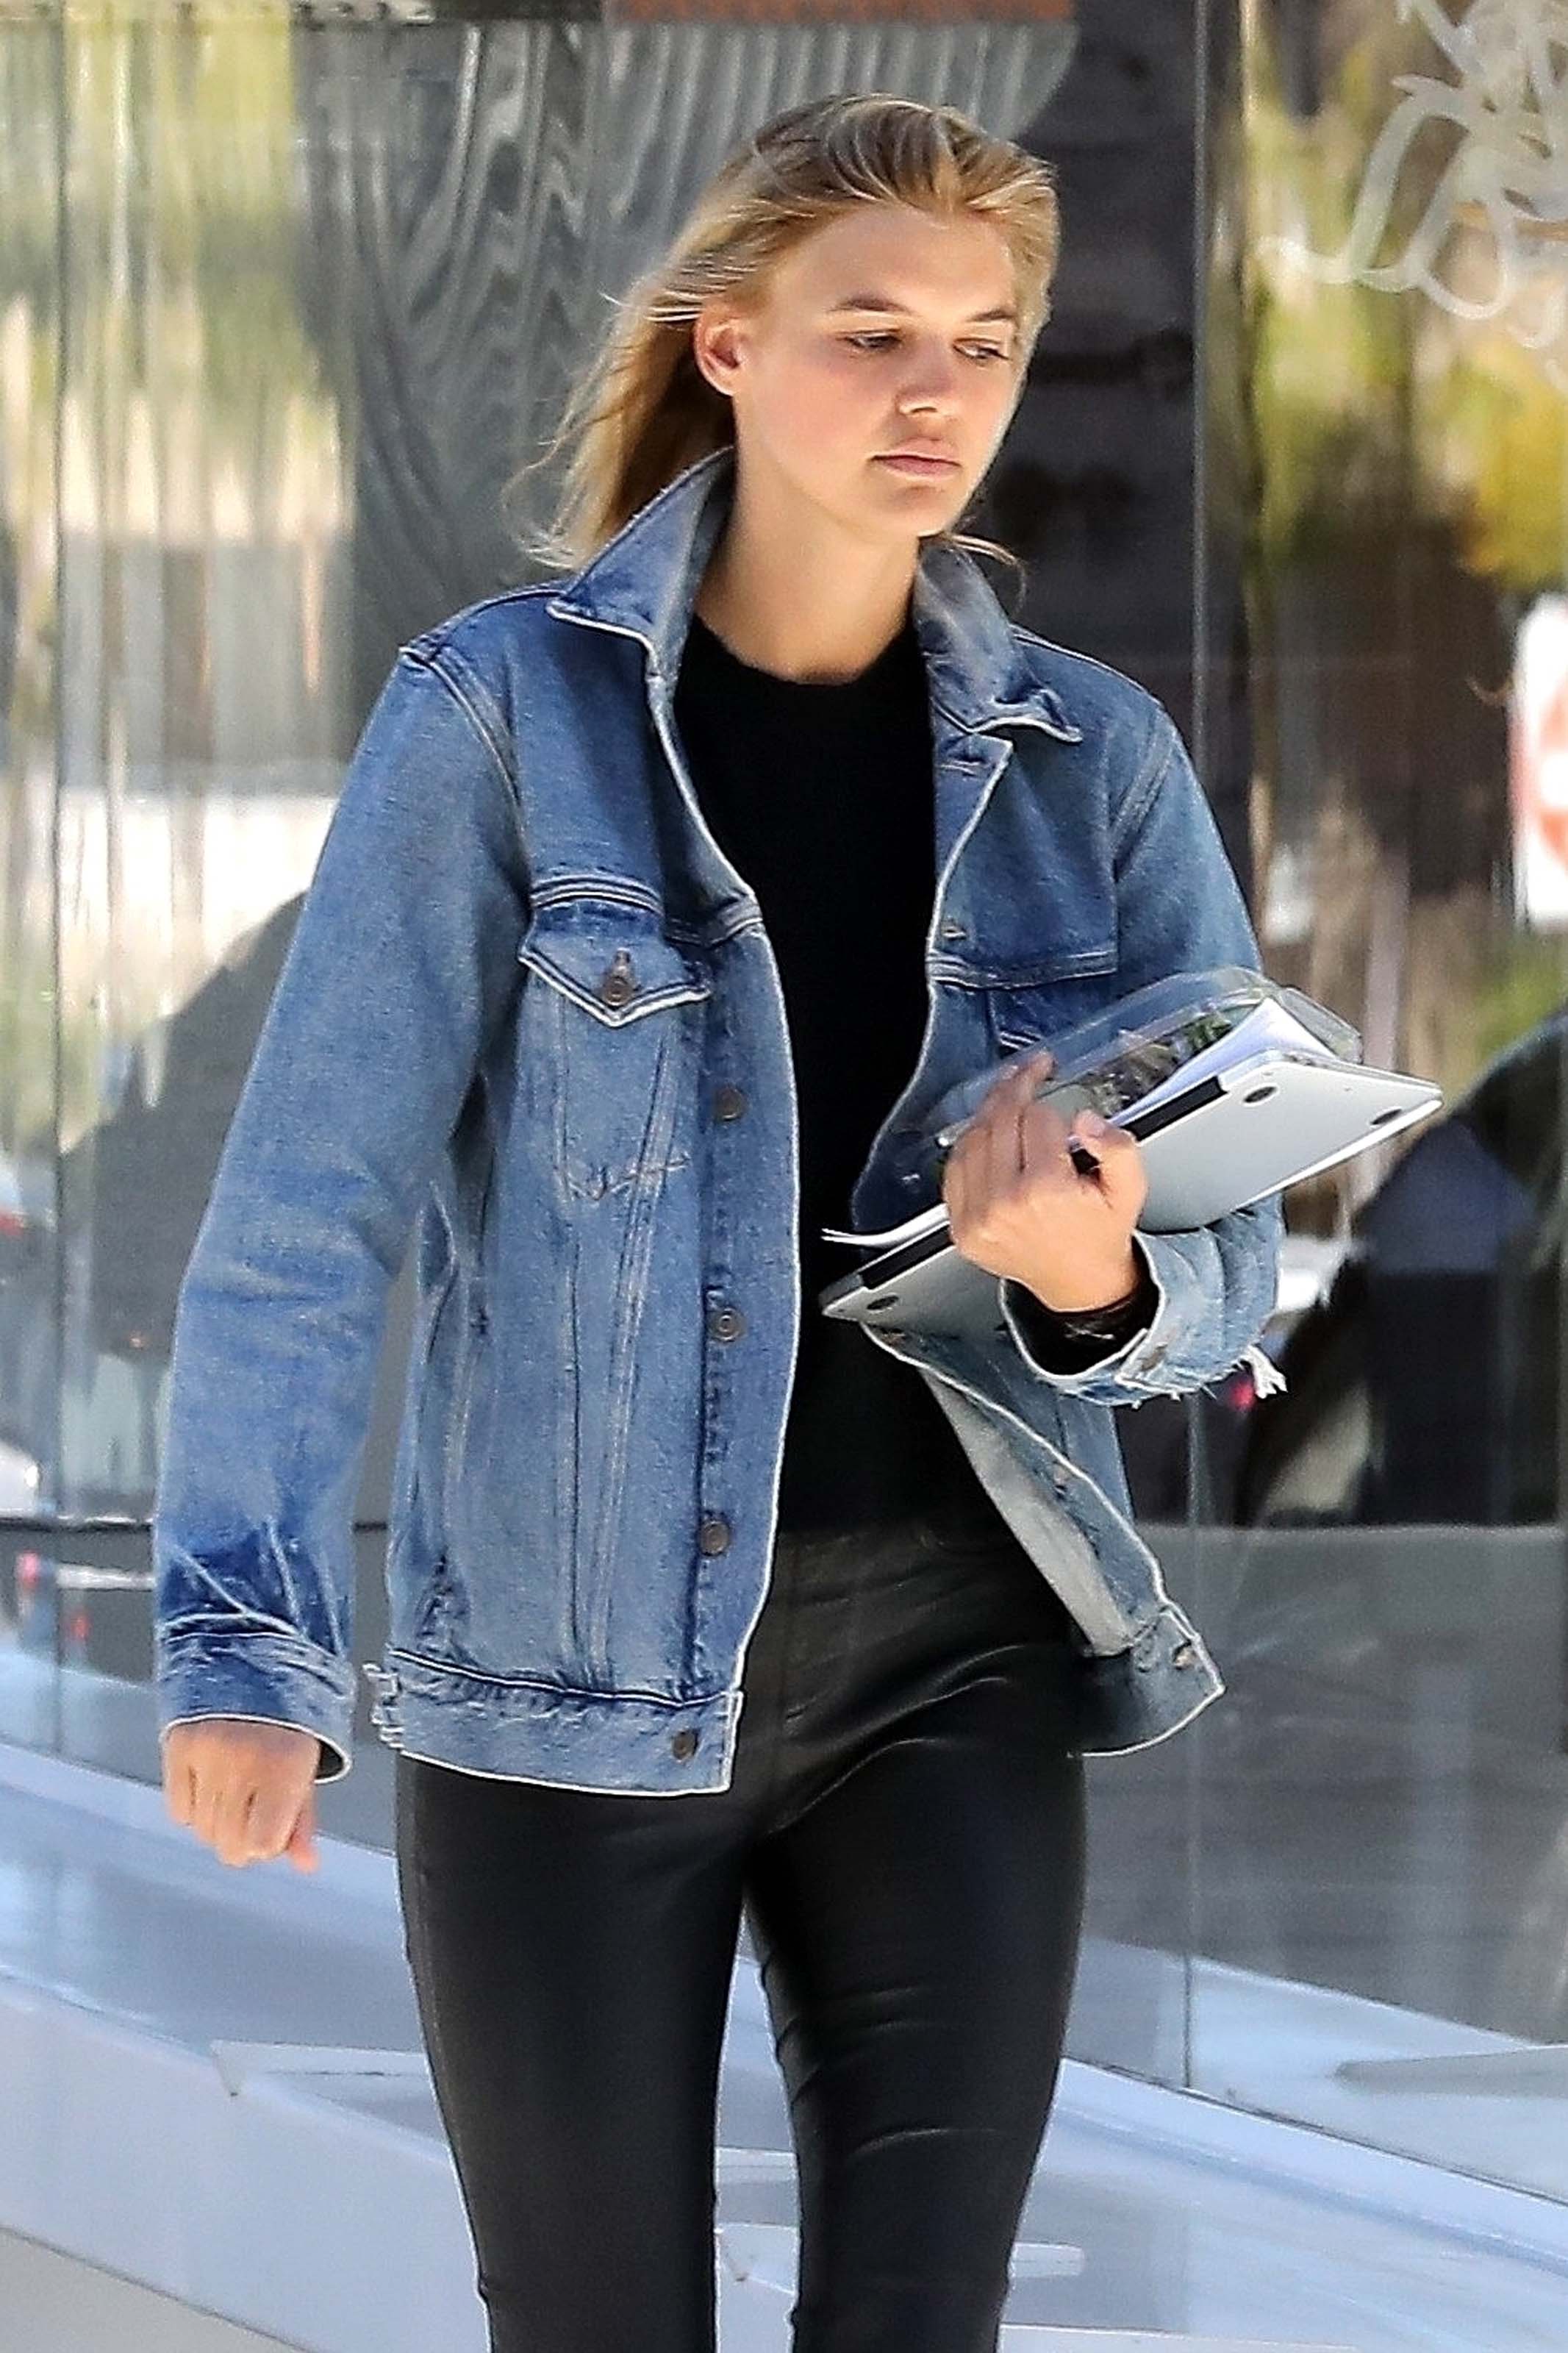 Kelly Rohrbach gets her hair done at Meche Salon